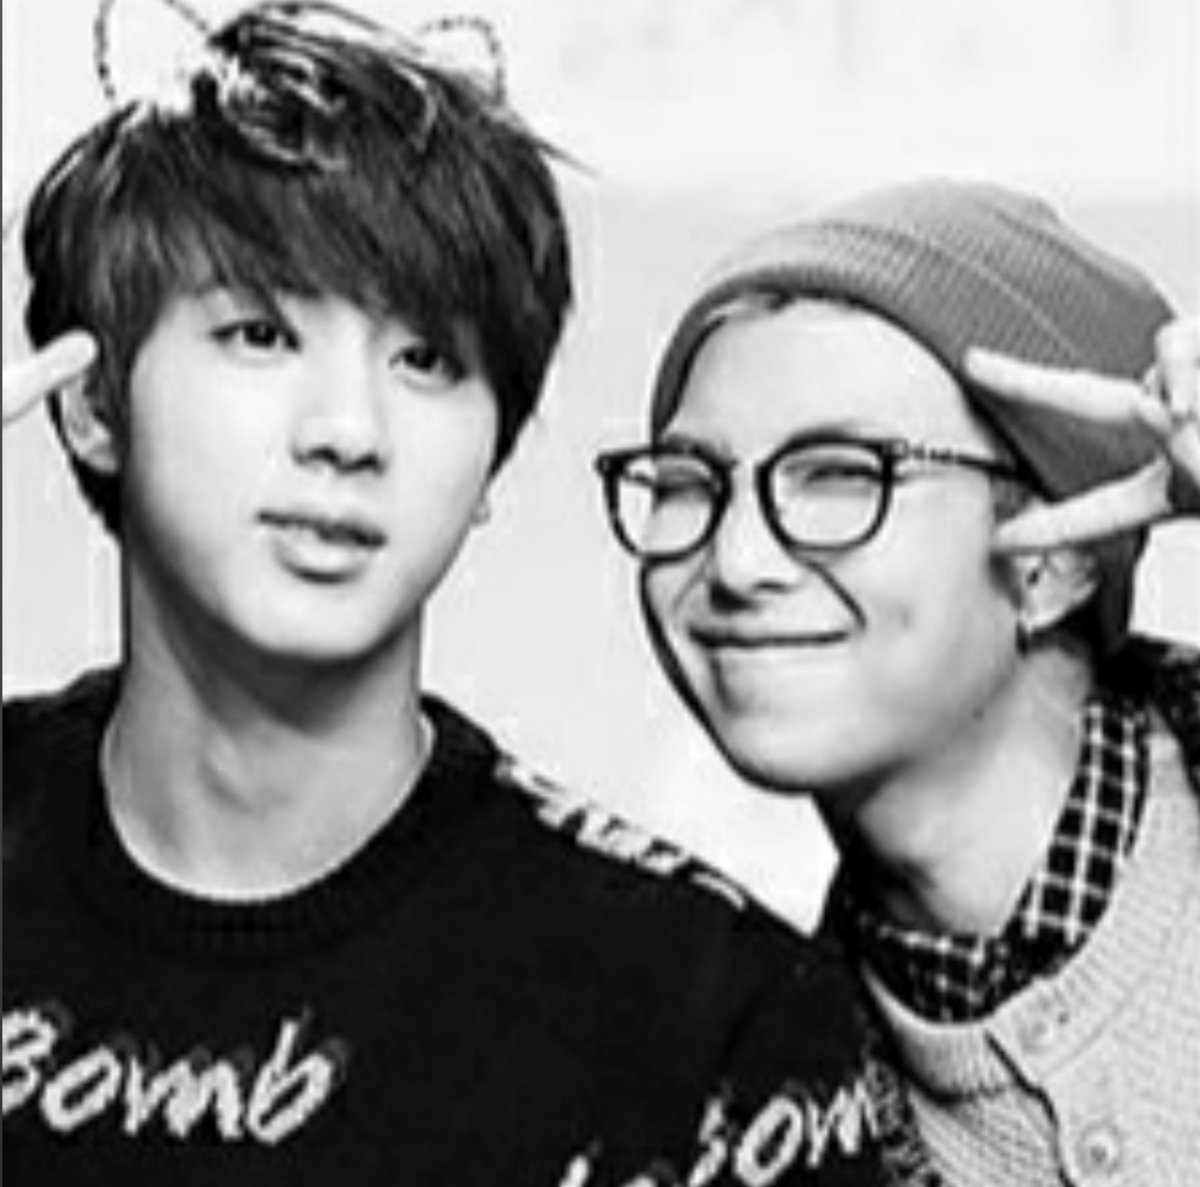 How to take care of your seokjin- a thread by namjoon 